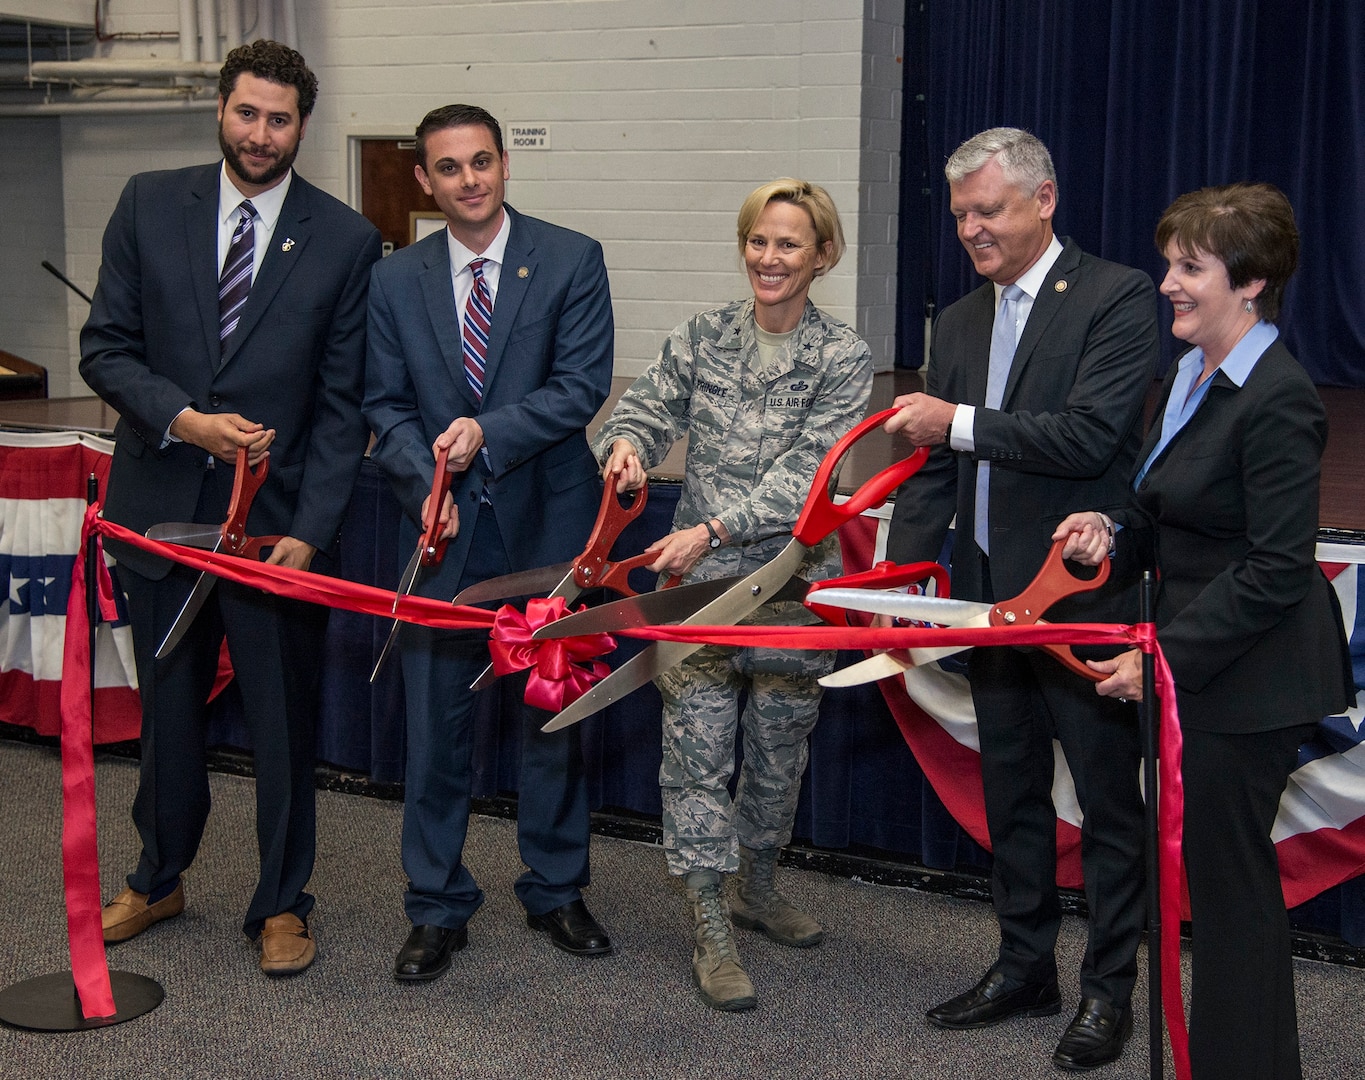 (From left) Jon Henry and Arnold Juvera from Microsoft; Brig. Gen. Heather Pringle, commander, 502nd Air Base Wing and Joint Base San Antonio; Dr. John Watret, Dr. John Watret, chancellor of Embry-Riddle Aeronautical University-Worldwide; and Lori Ham, Microsoft sales director, U.S. South Central Education, cut the ribbon to open the newest Microsoft Software & Systems Academy. The academy will be located at nearby JBSA-Randolph, and provide service members who are leaving the military with IT-related training and certifications.